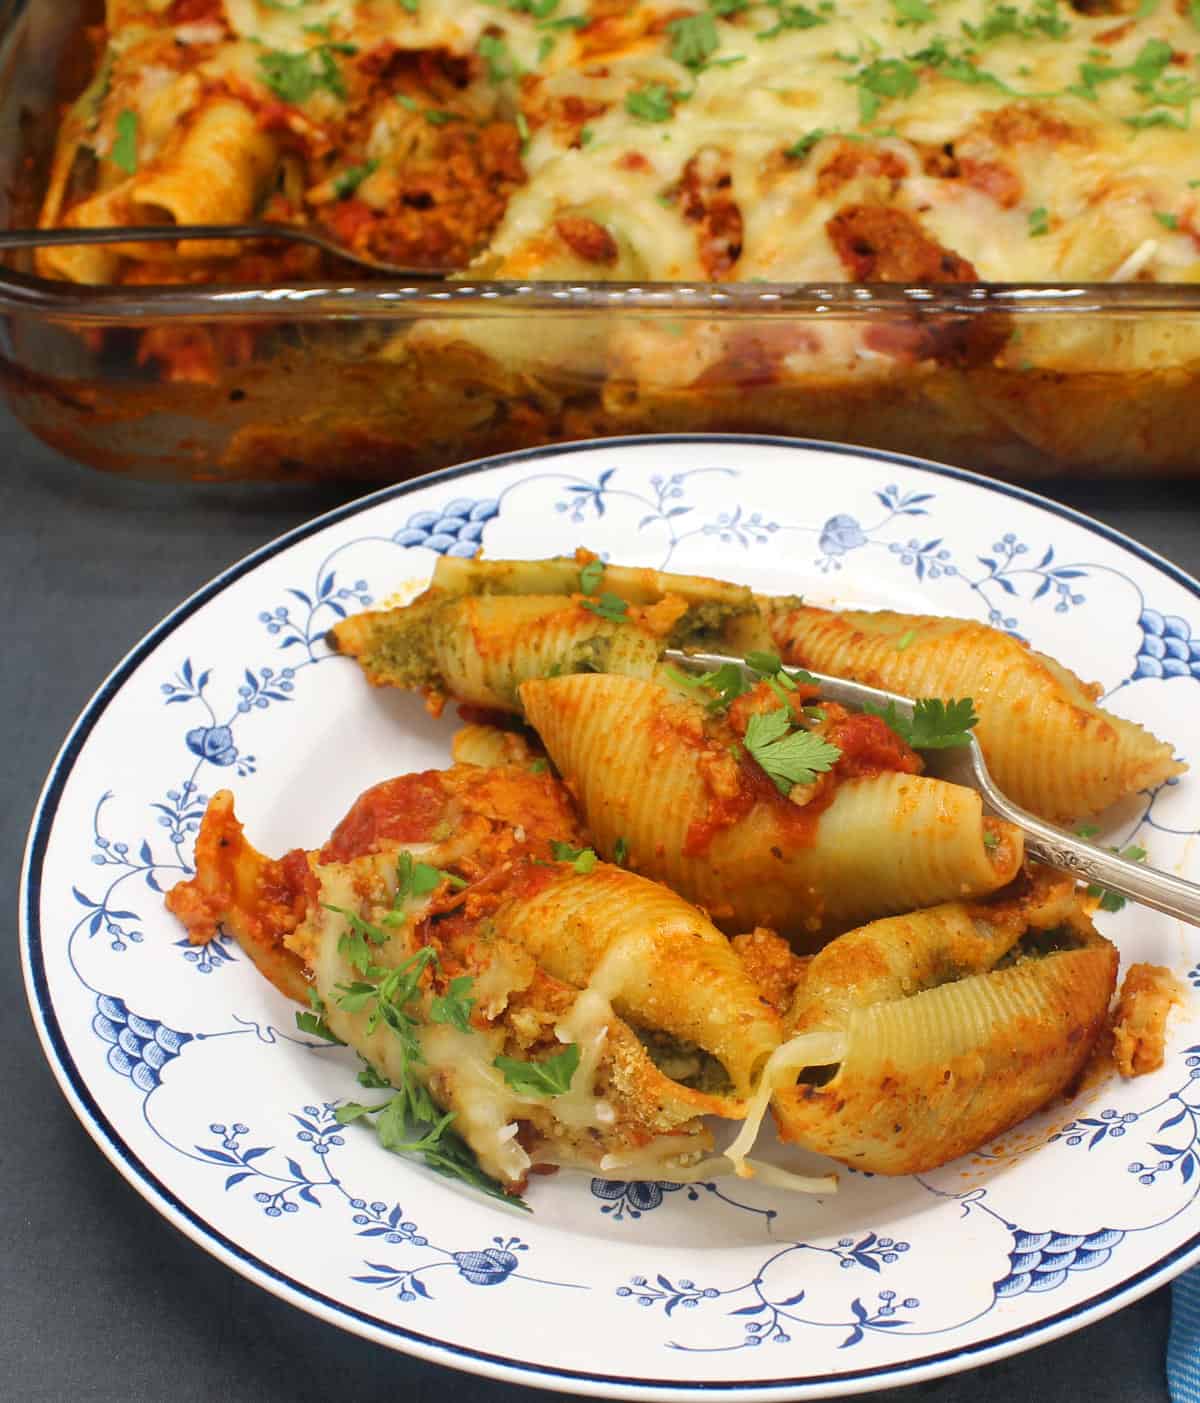 Stuffed pasta shells with spinach ricotta stuffing, marinara and parsley in an Italian blue and white dish with baking dish in the back.